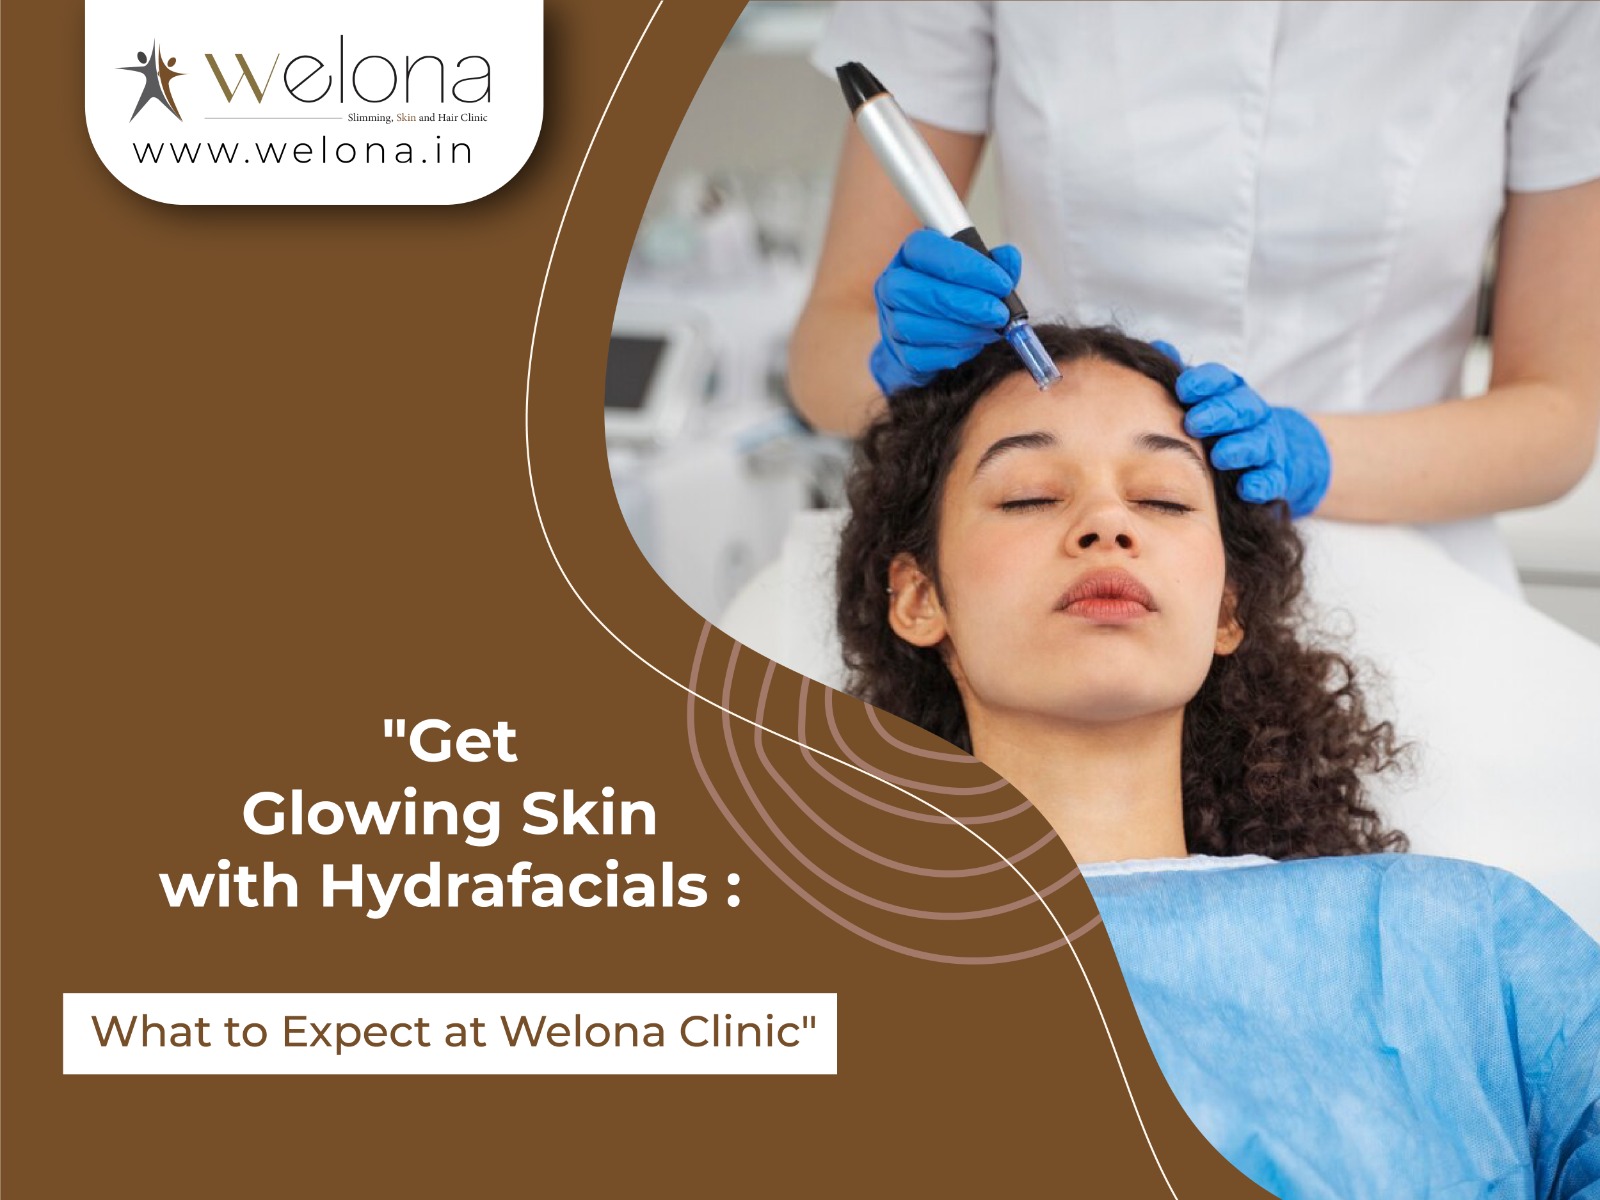 Get Glowing Skin with Hydrafacials: What to Expect at Welona Clinic